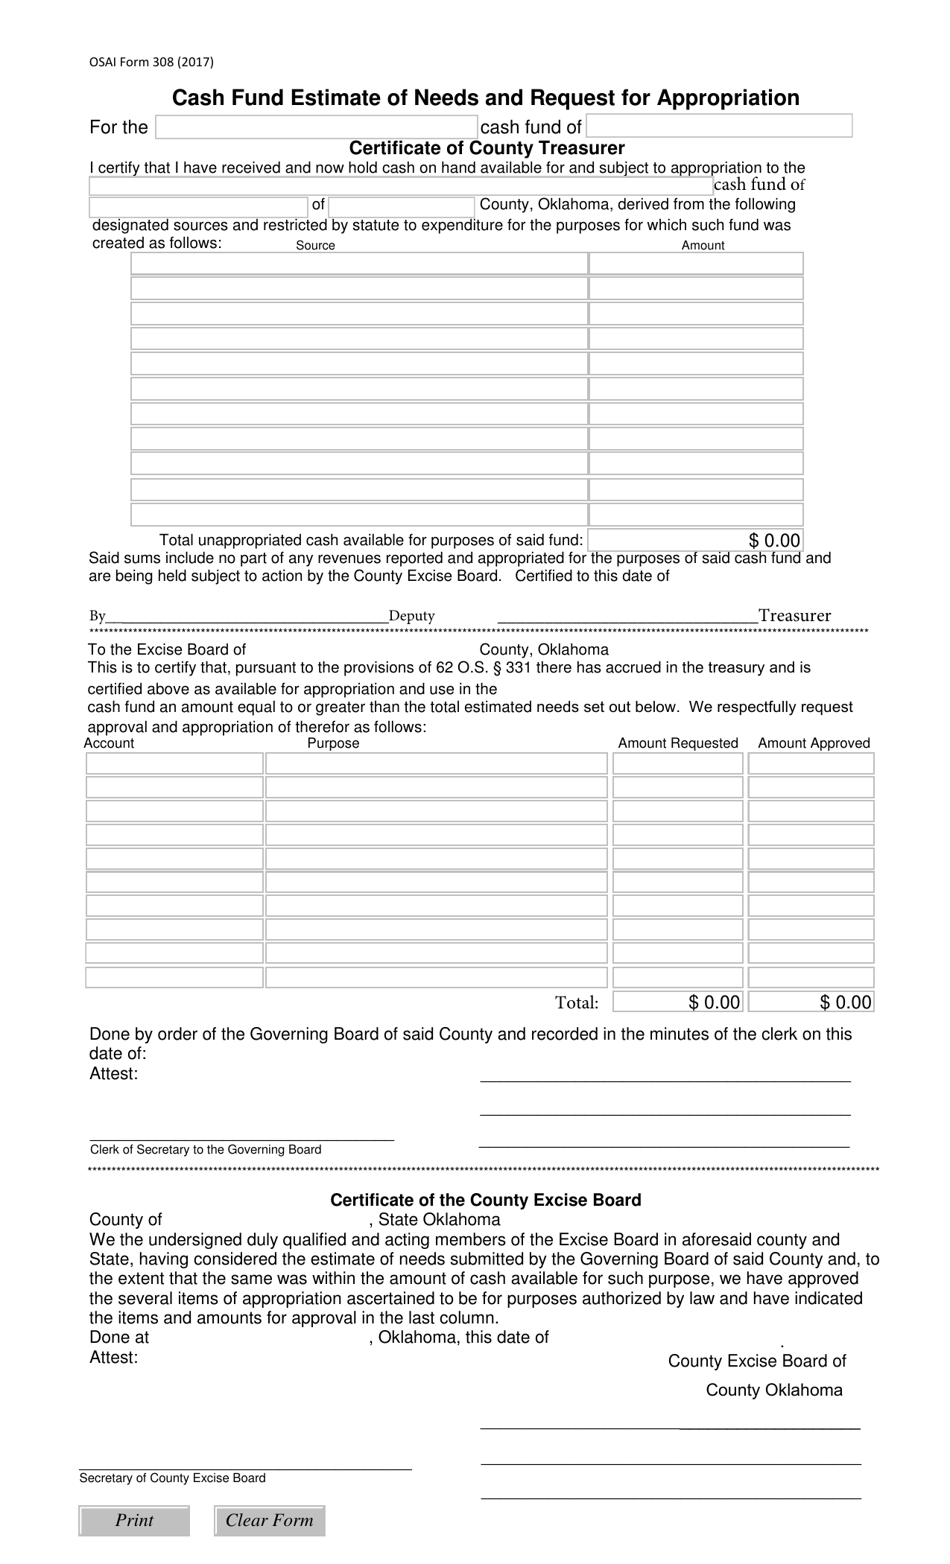 OSAI Form 308 Cash Fund Estimate of Needs and Request for Appropriation - Oklahoma, Page 1